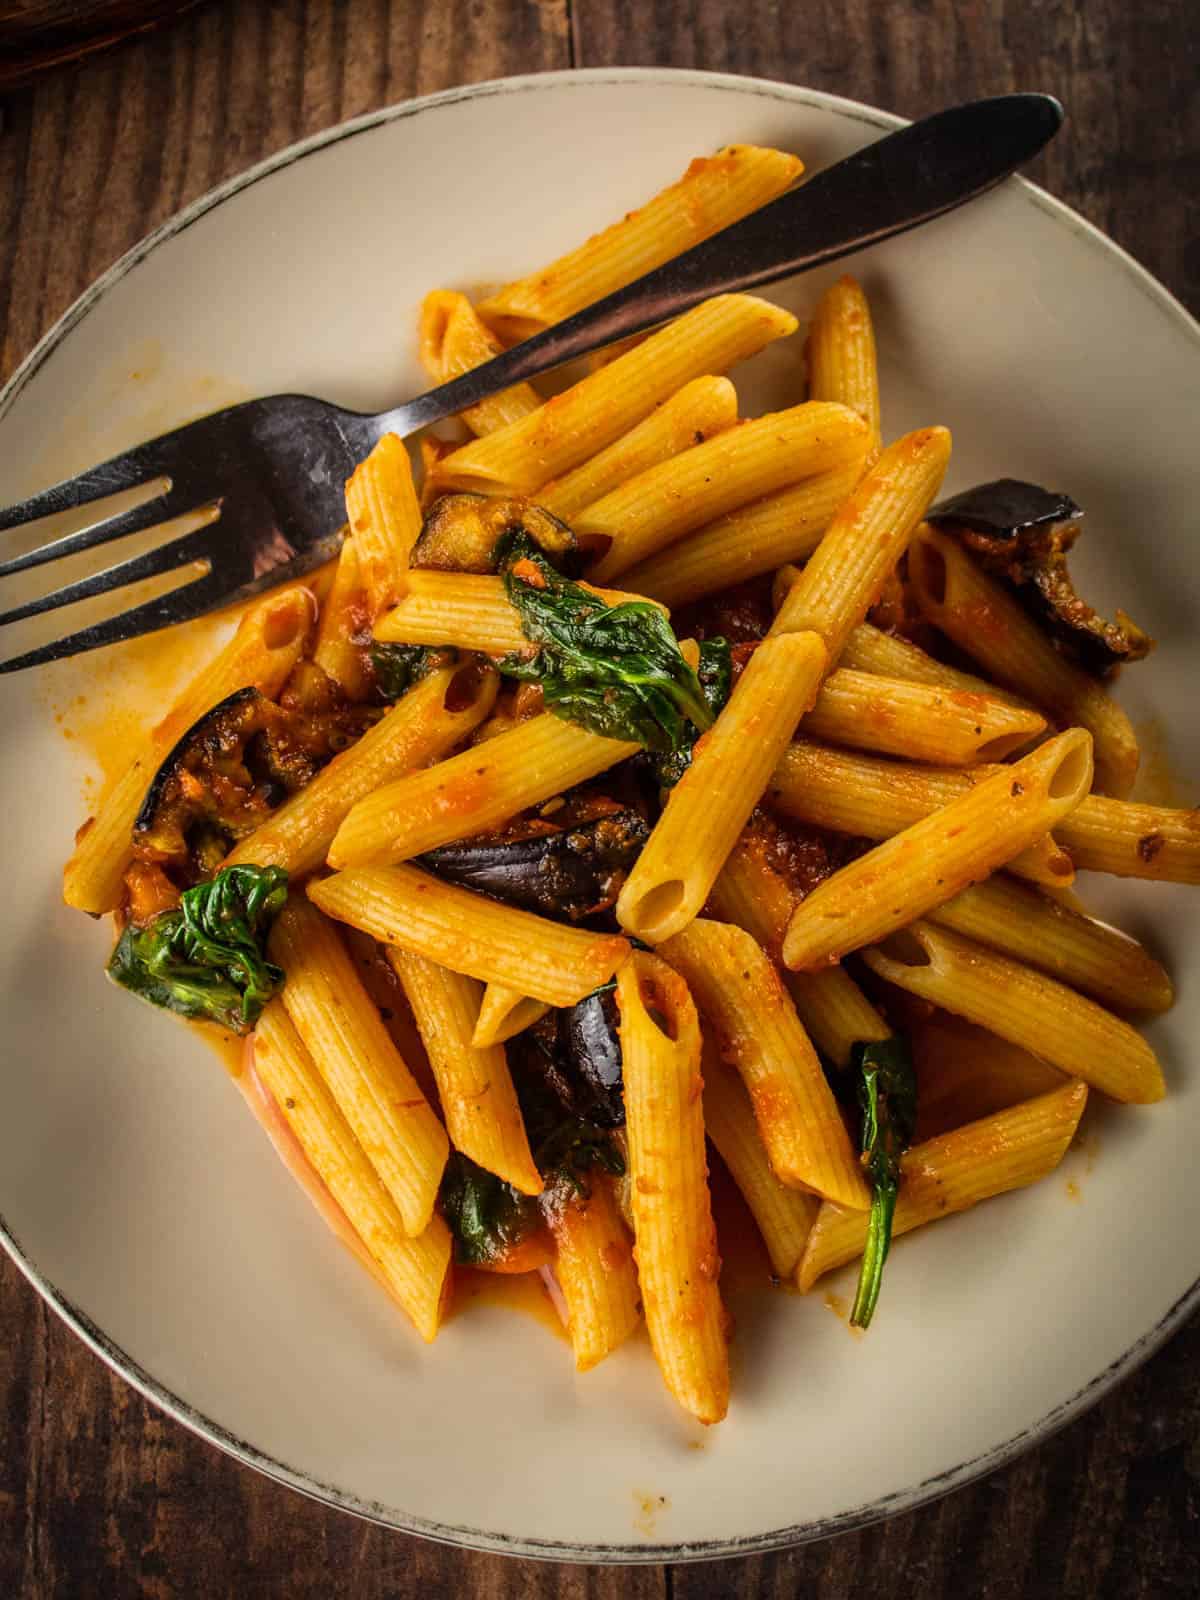 plate of penne pasta with roasted eggplant pieces, baby spinach and marinara sauce with a fork.